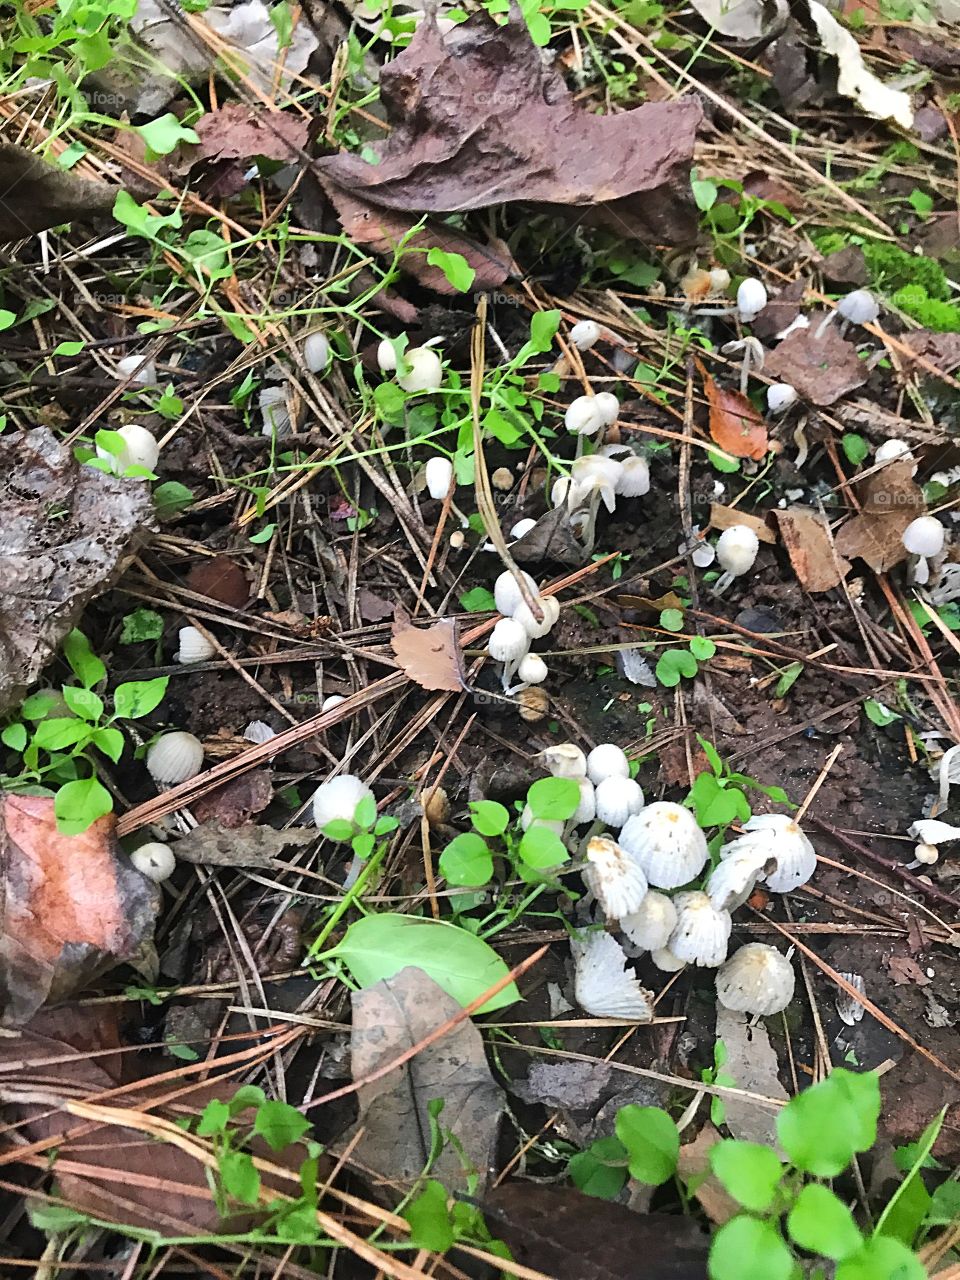 Small white mushrooms in a patch of dirt dotted with brown pine needles, bark, and green leaves and weeds